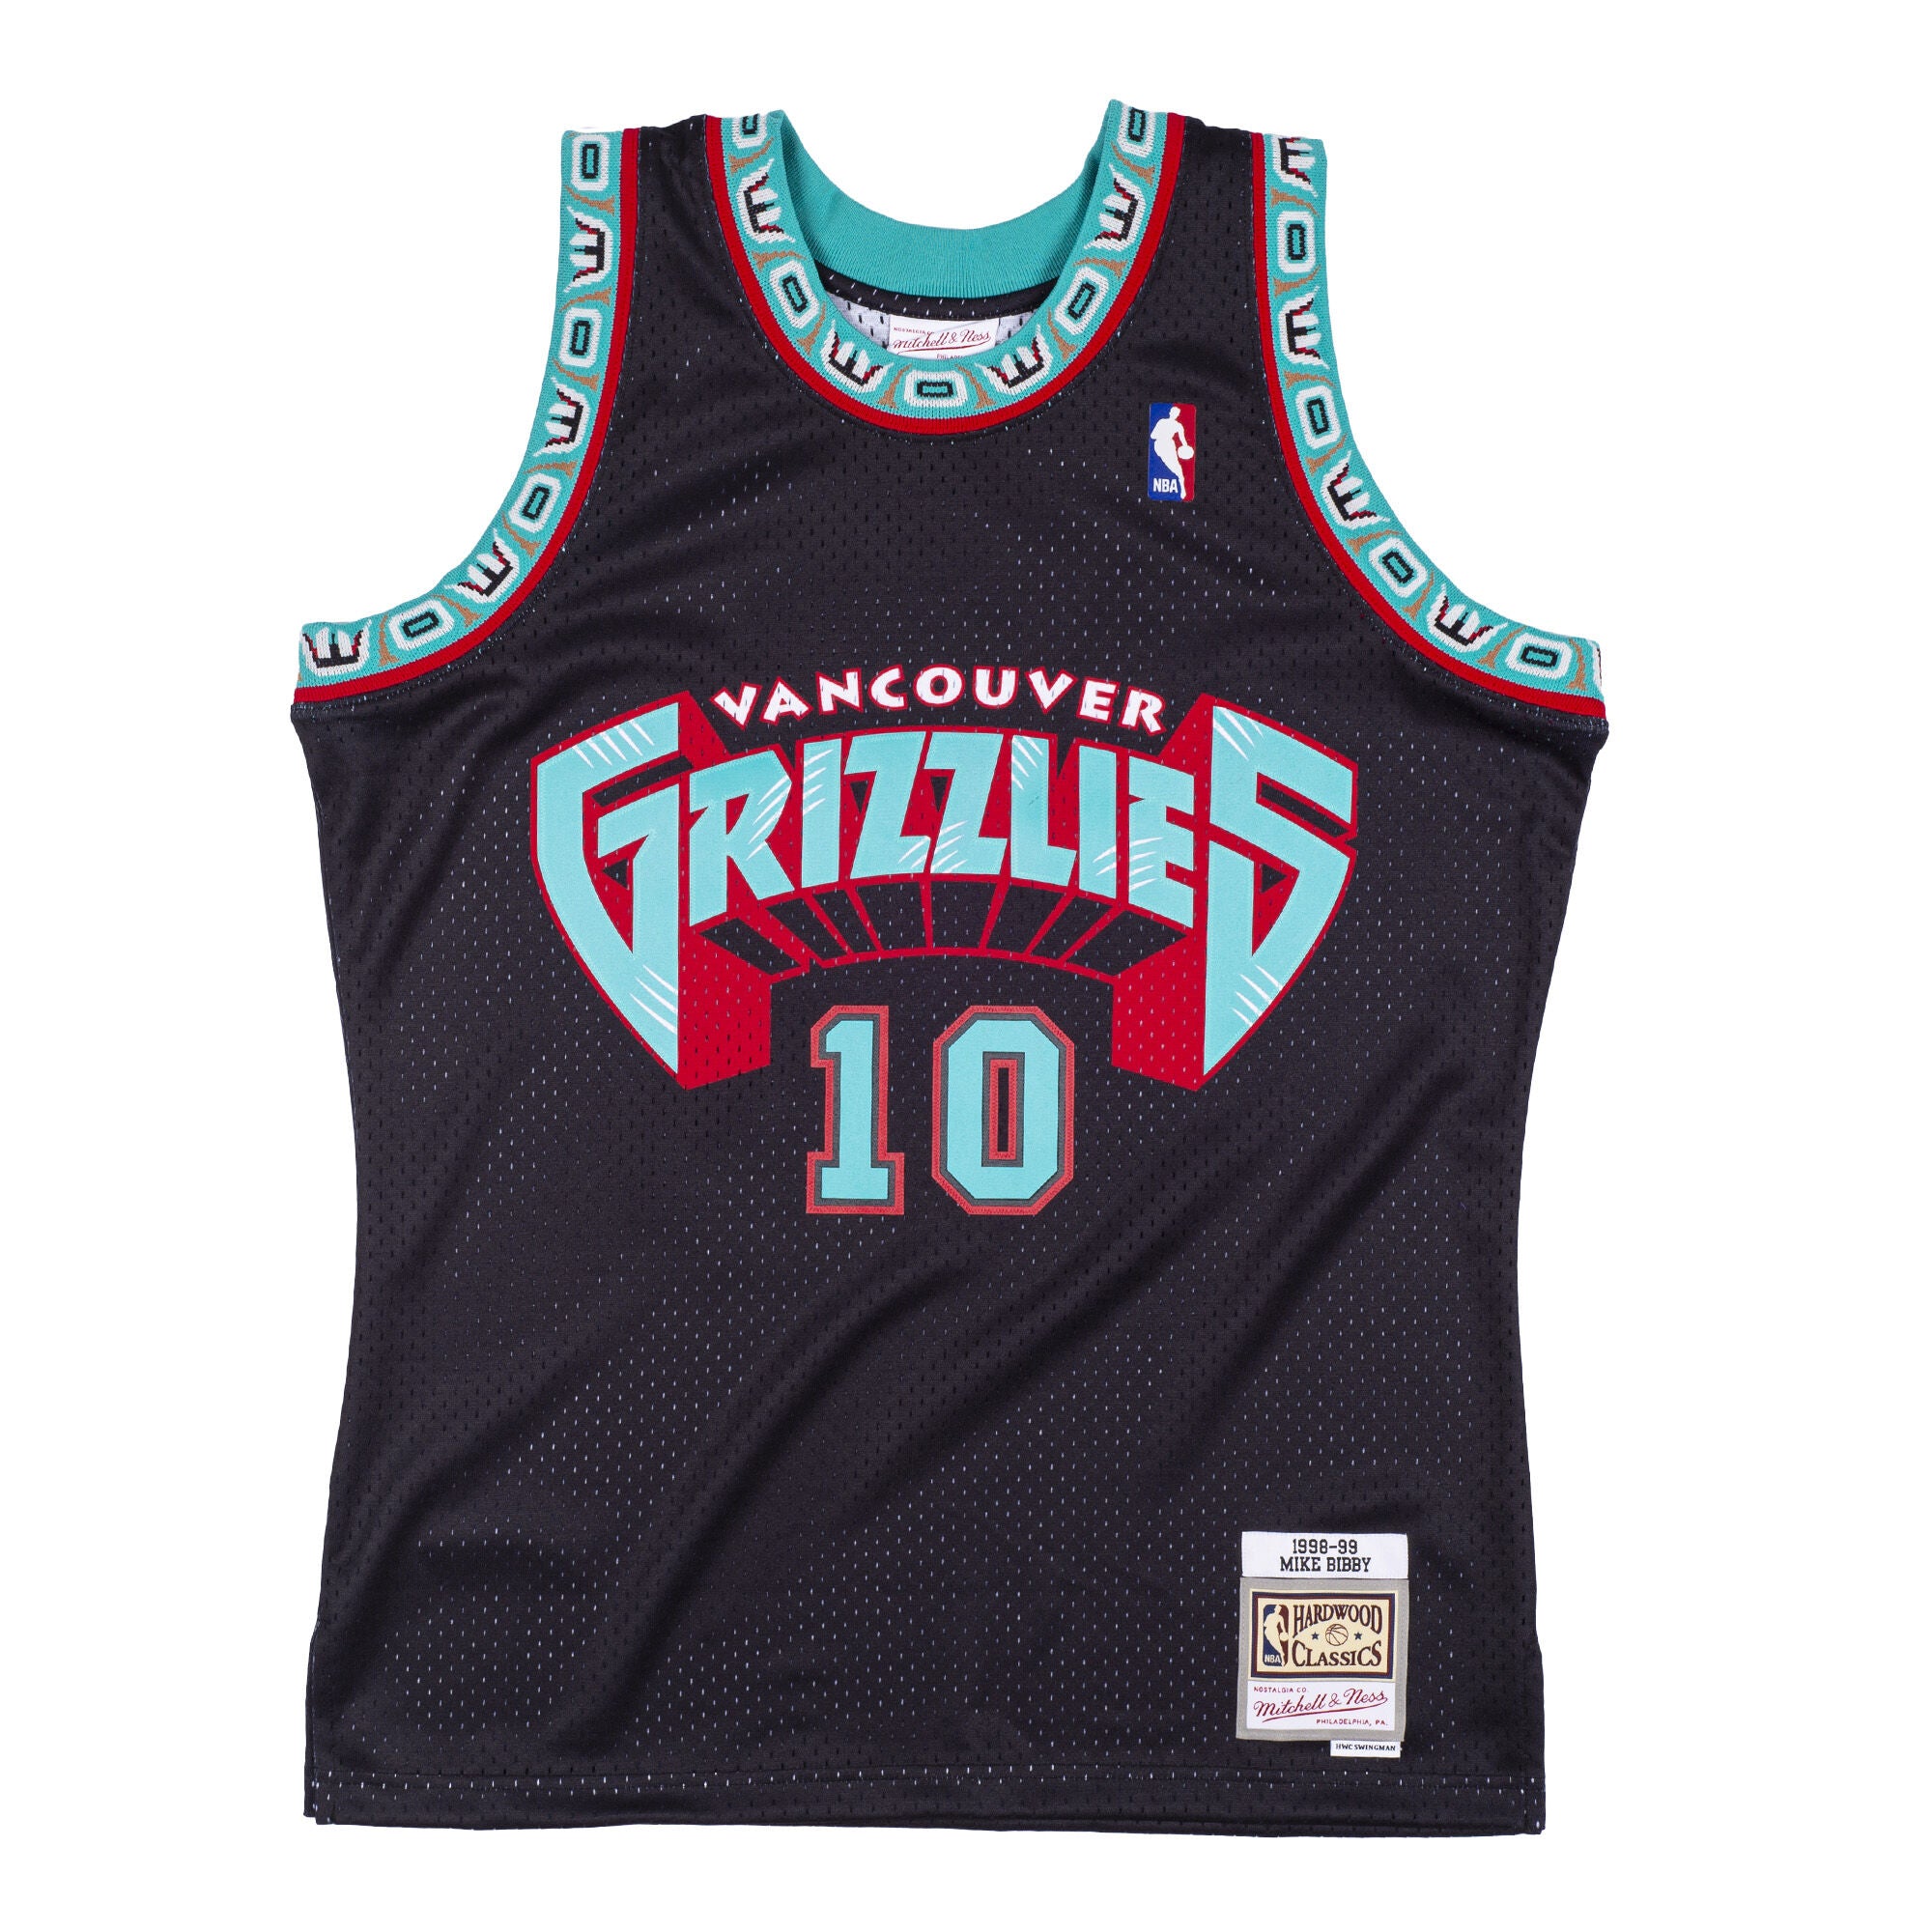 MITCHELL & NESS NBA AUTHENTIC VANCOUVER GRIZZLIES 1995-96 WARM UP